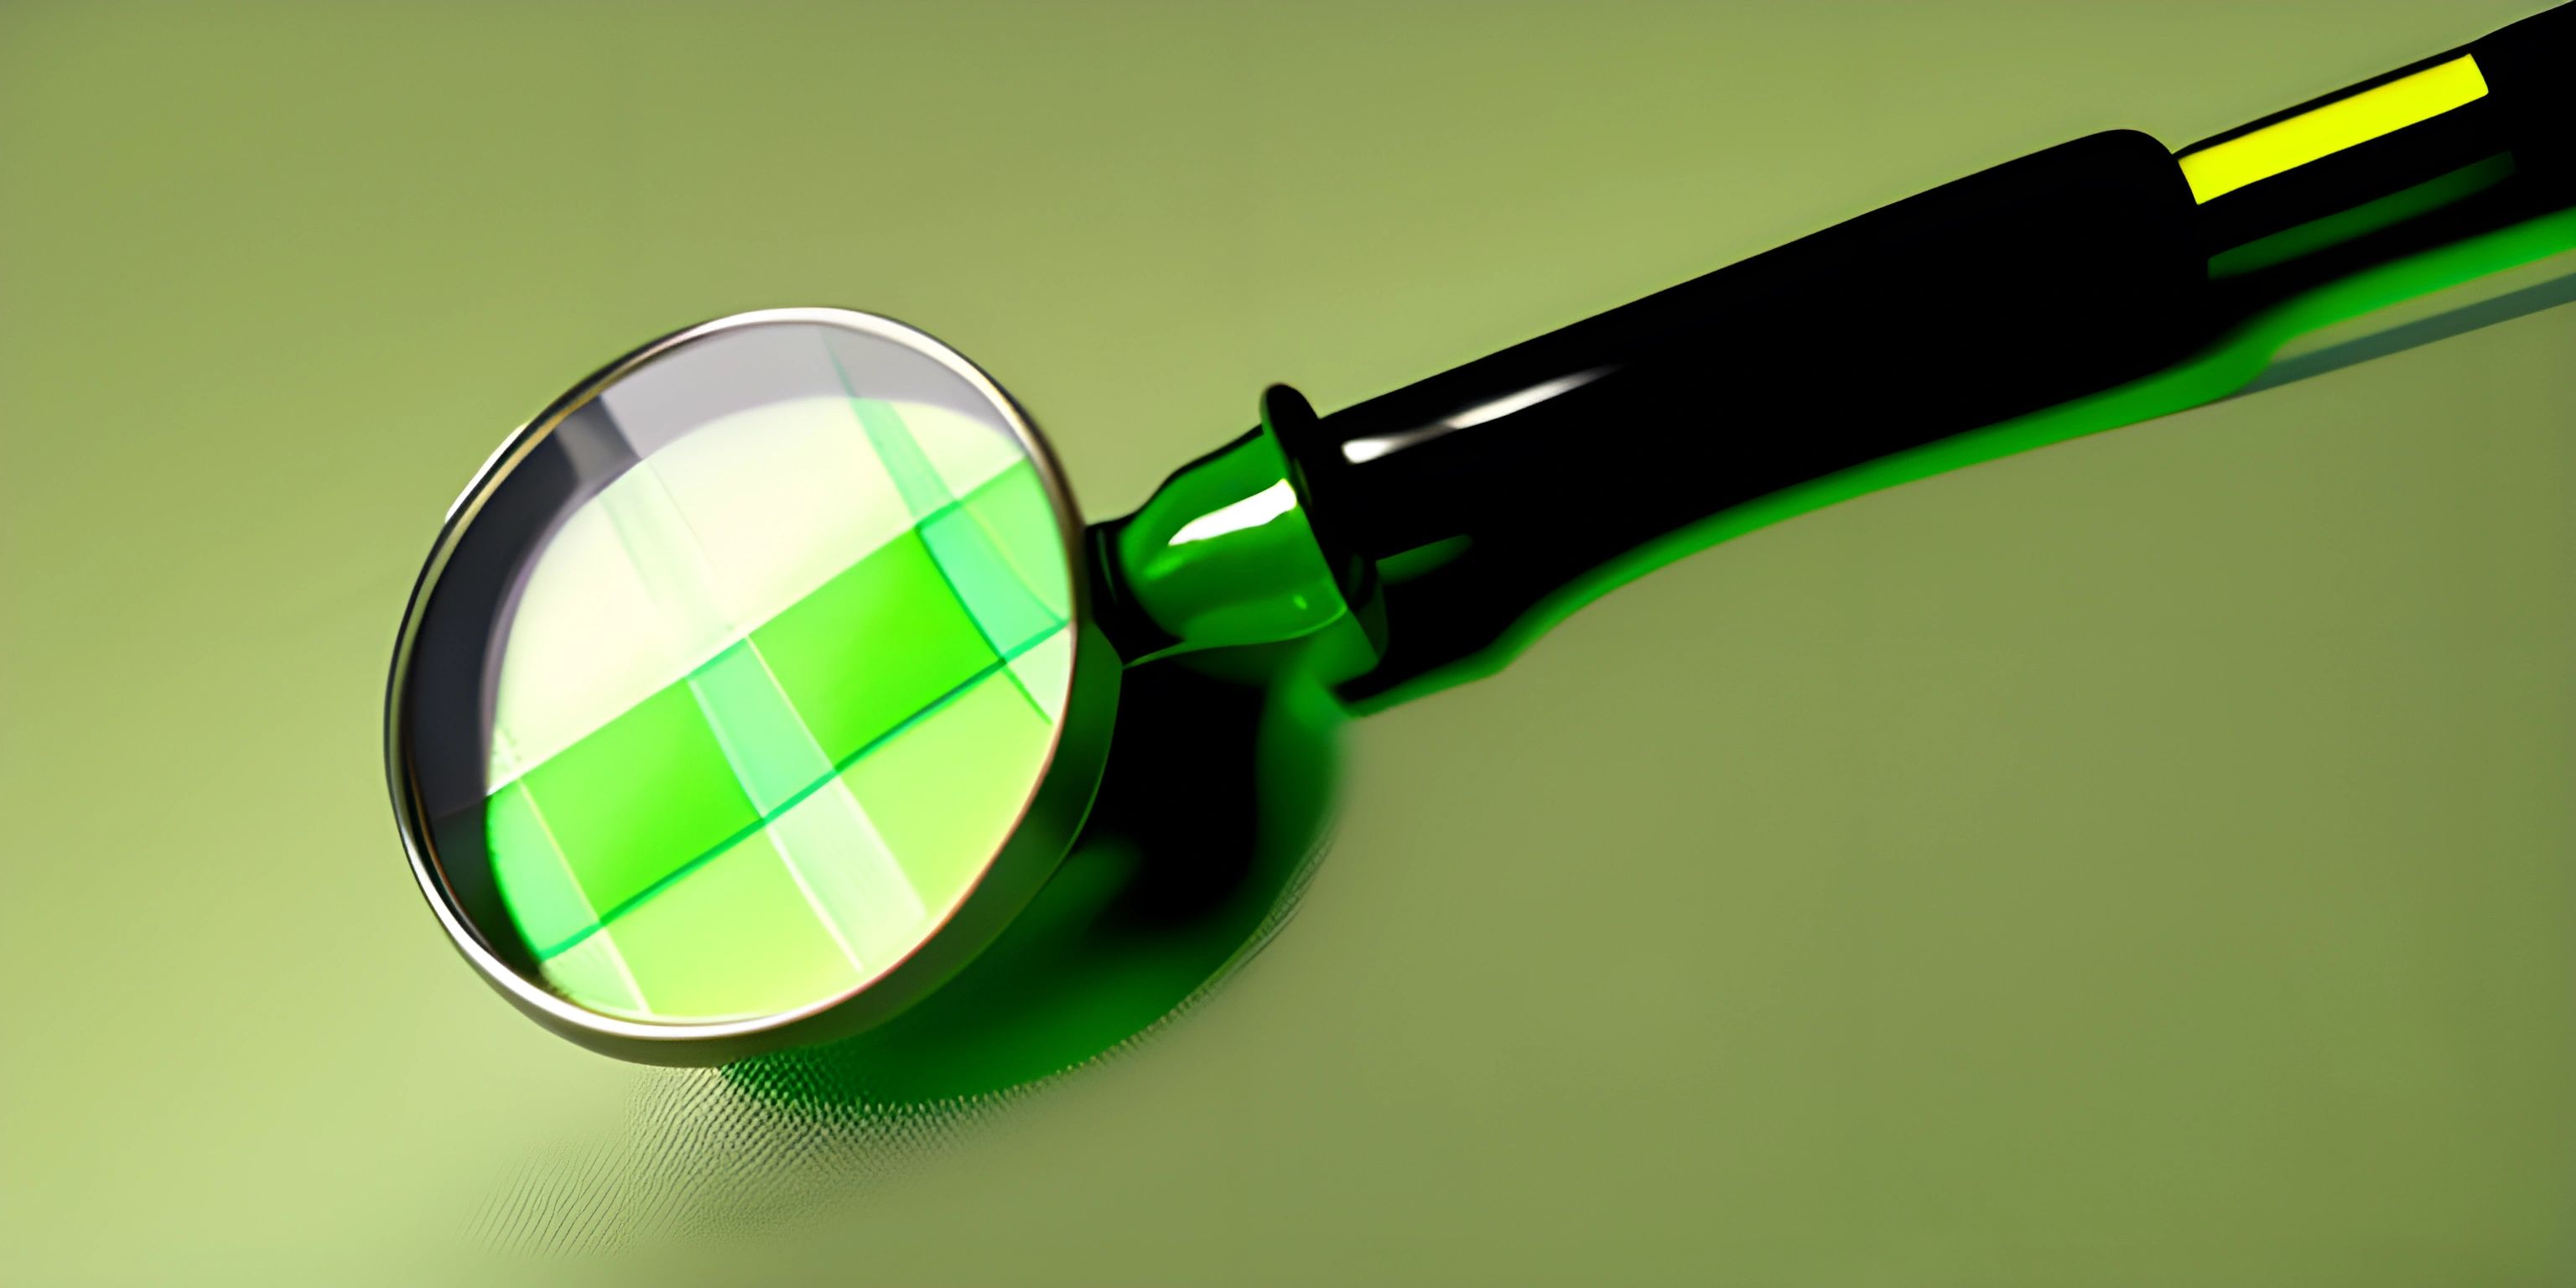 green tiles and magnifying glass with a plastic handle on a surface with shadow